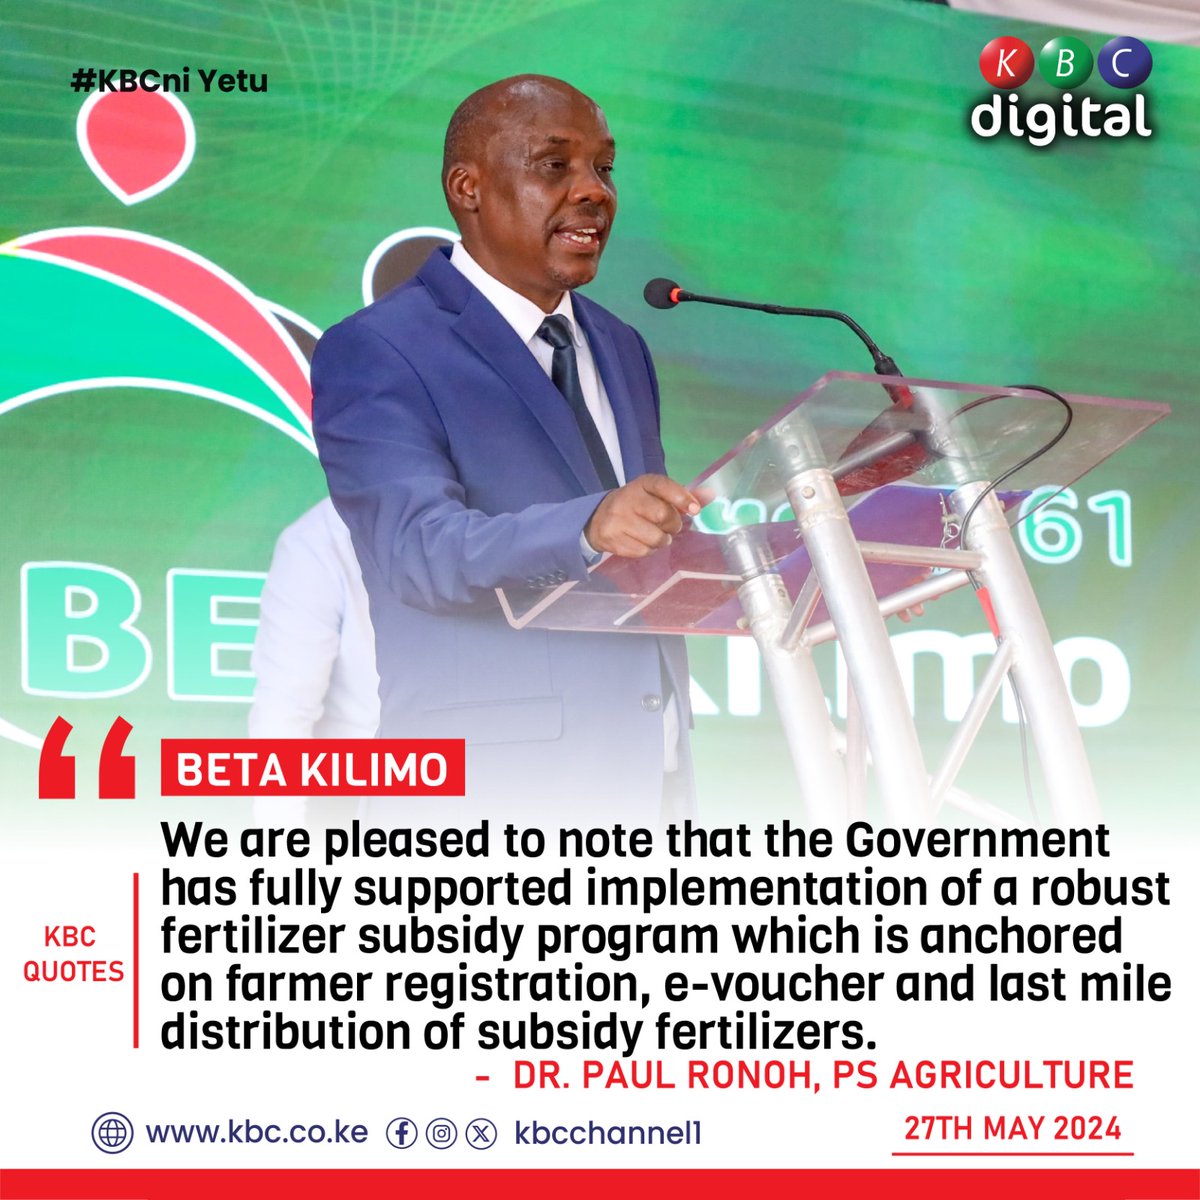 We are pleased to note that the Government has fully supported implementation of a robust fertilizer subsidy program which is anchored on farmer registration, e-voucher and last mile distribution of subsidy fertilizers. - PS, Agriculture Dr. Paul Ronoh #BETAKilimo